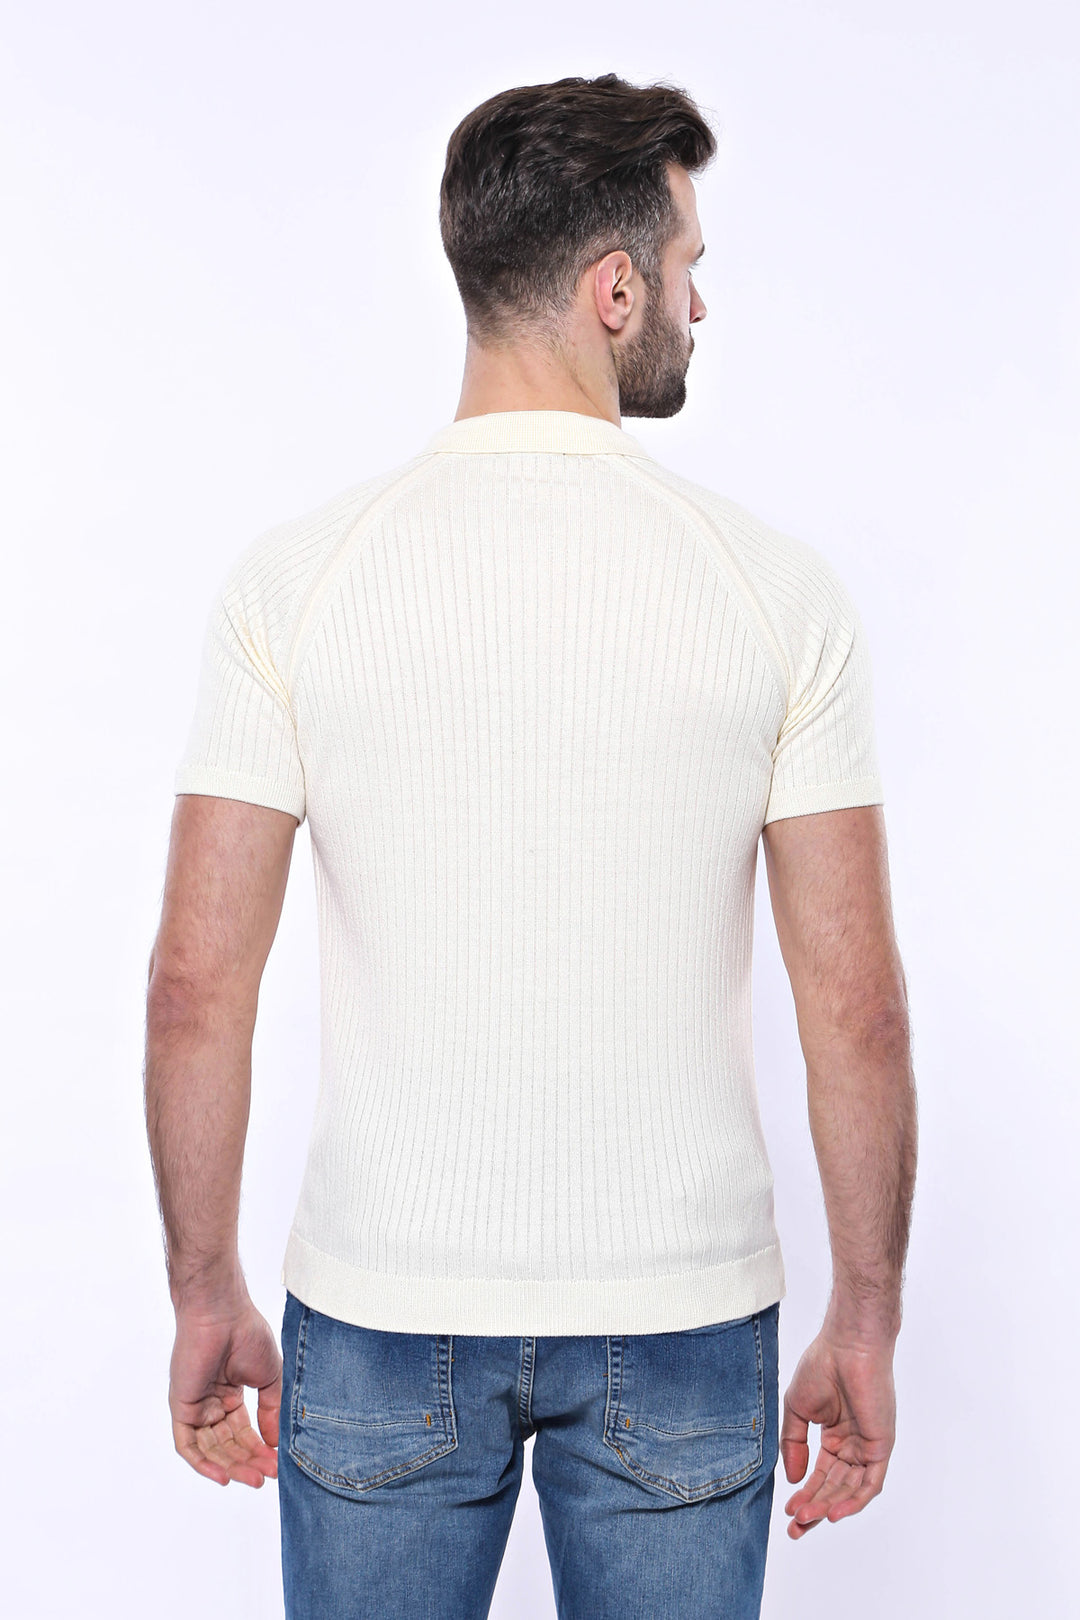 Polo Zippered Patterned Cream Knitted T-Shirt - Wessi